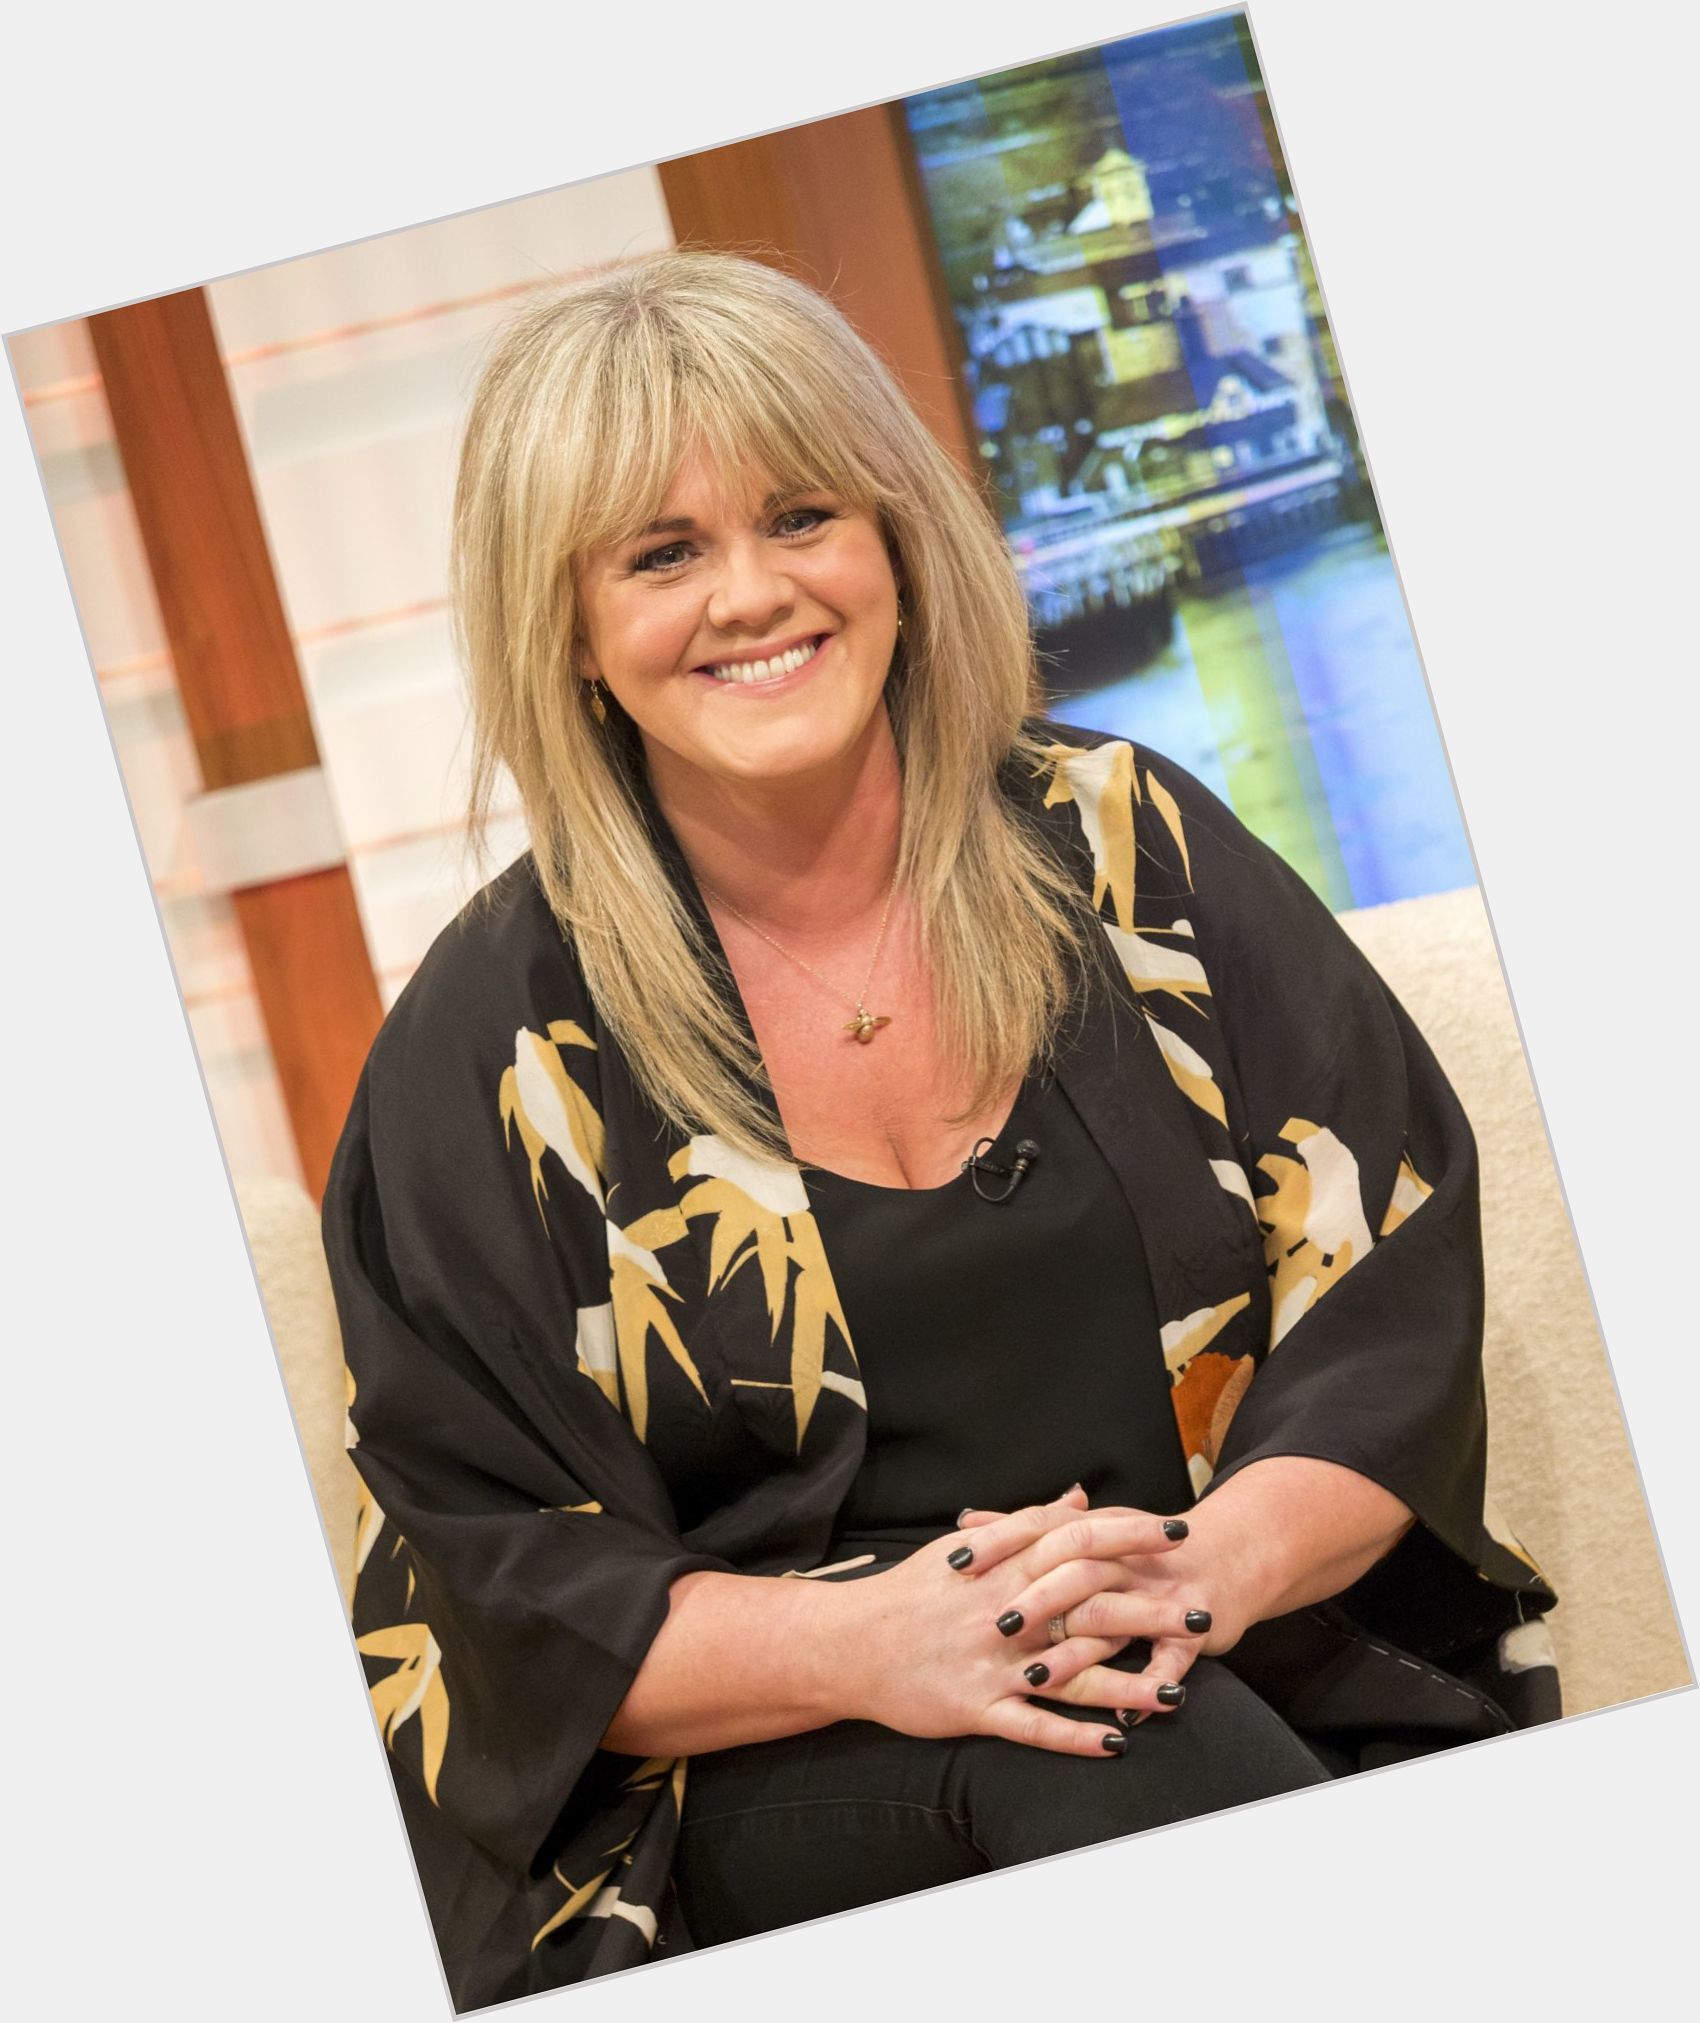 Https://fanpagepress.net/m/S/Sally Lindsay Hairstyle 4